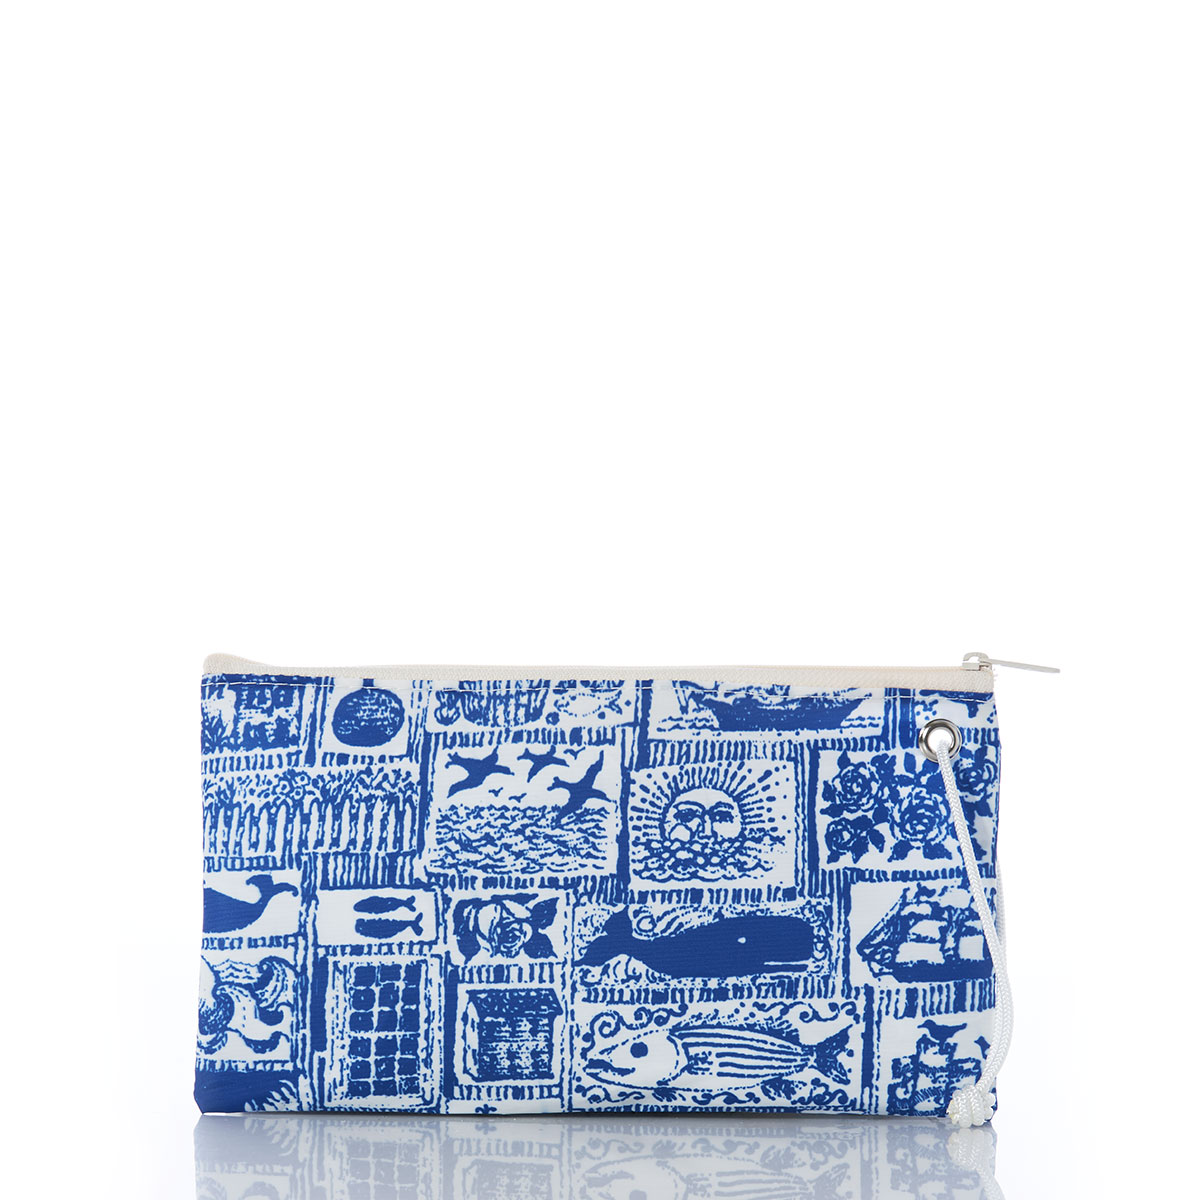 blue squares filled with various nautical imagery printed on recycled sail cloth large wristlet with white zipper and wristlet strap